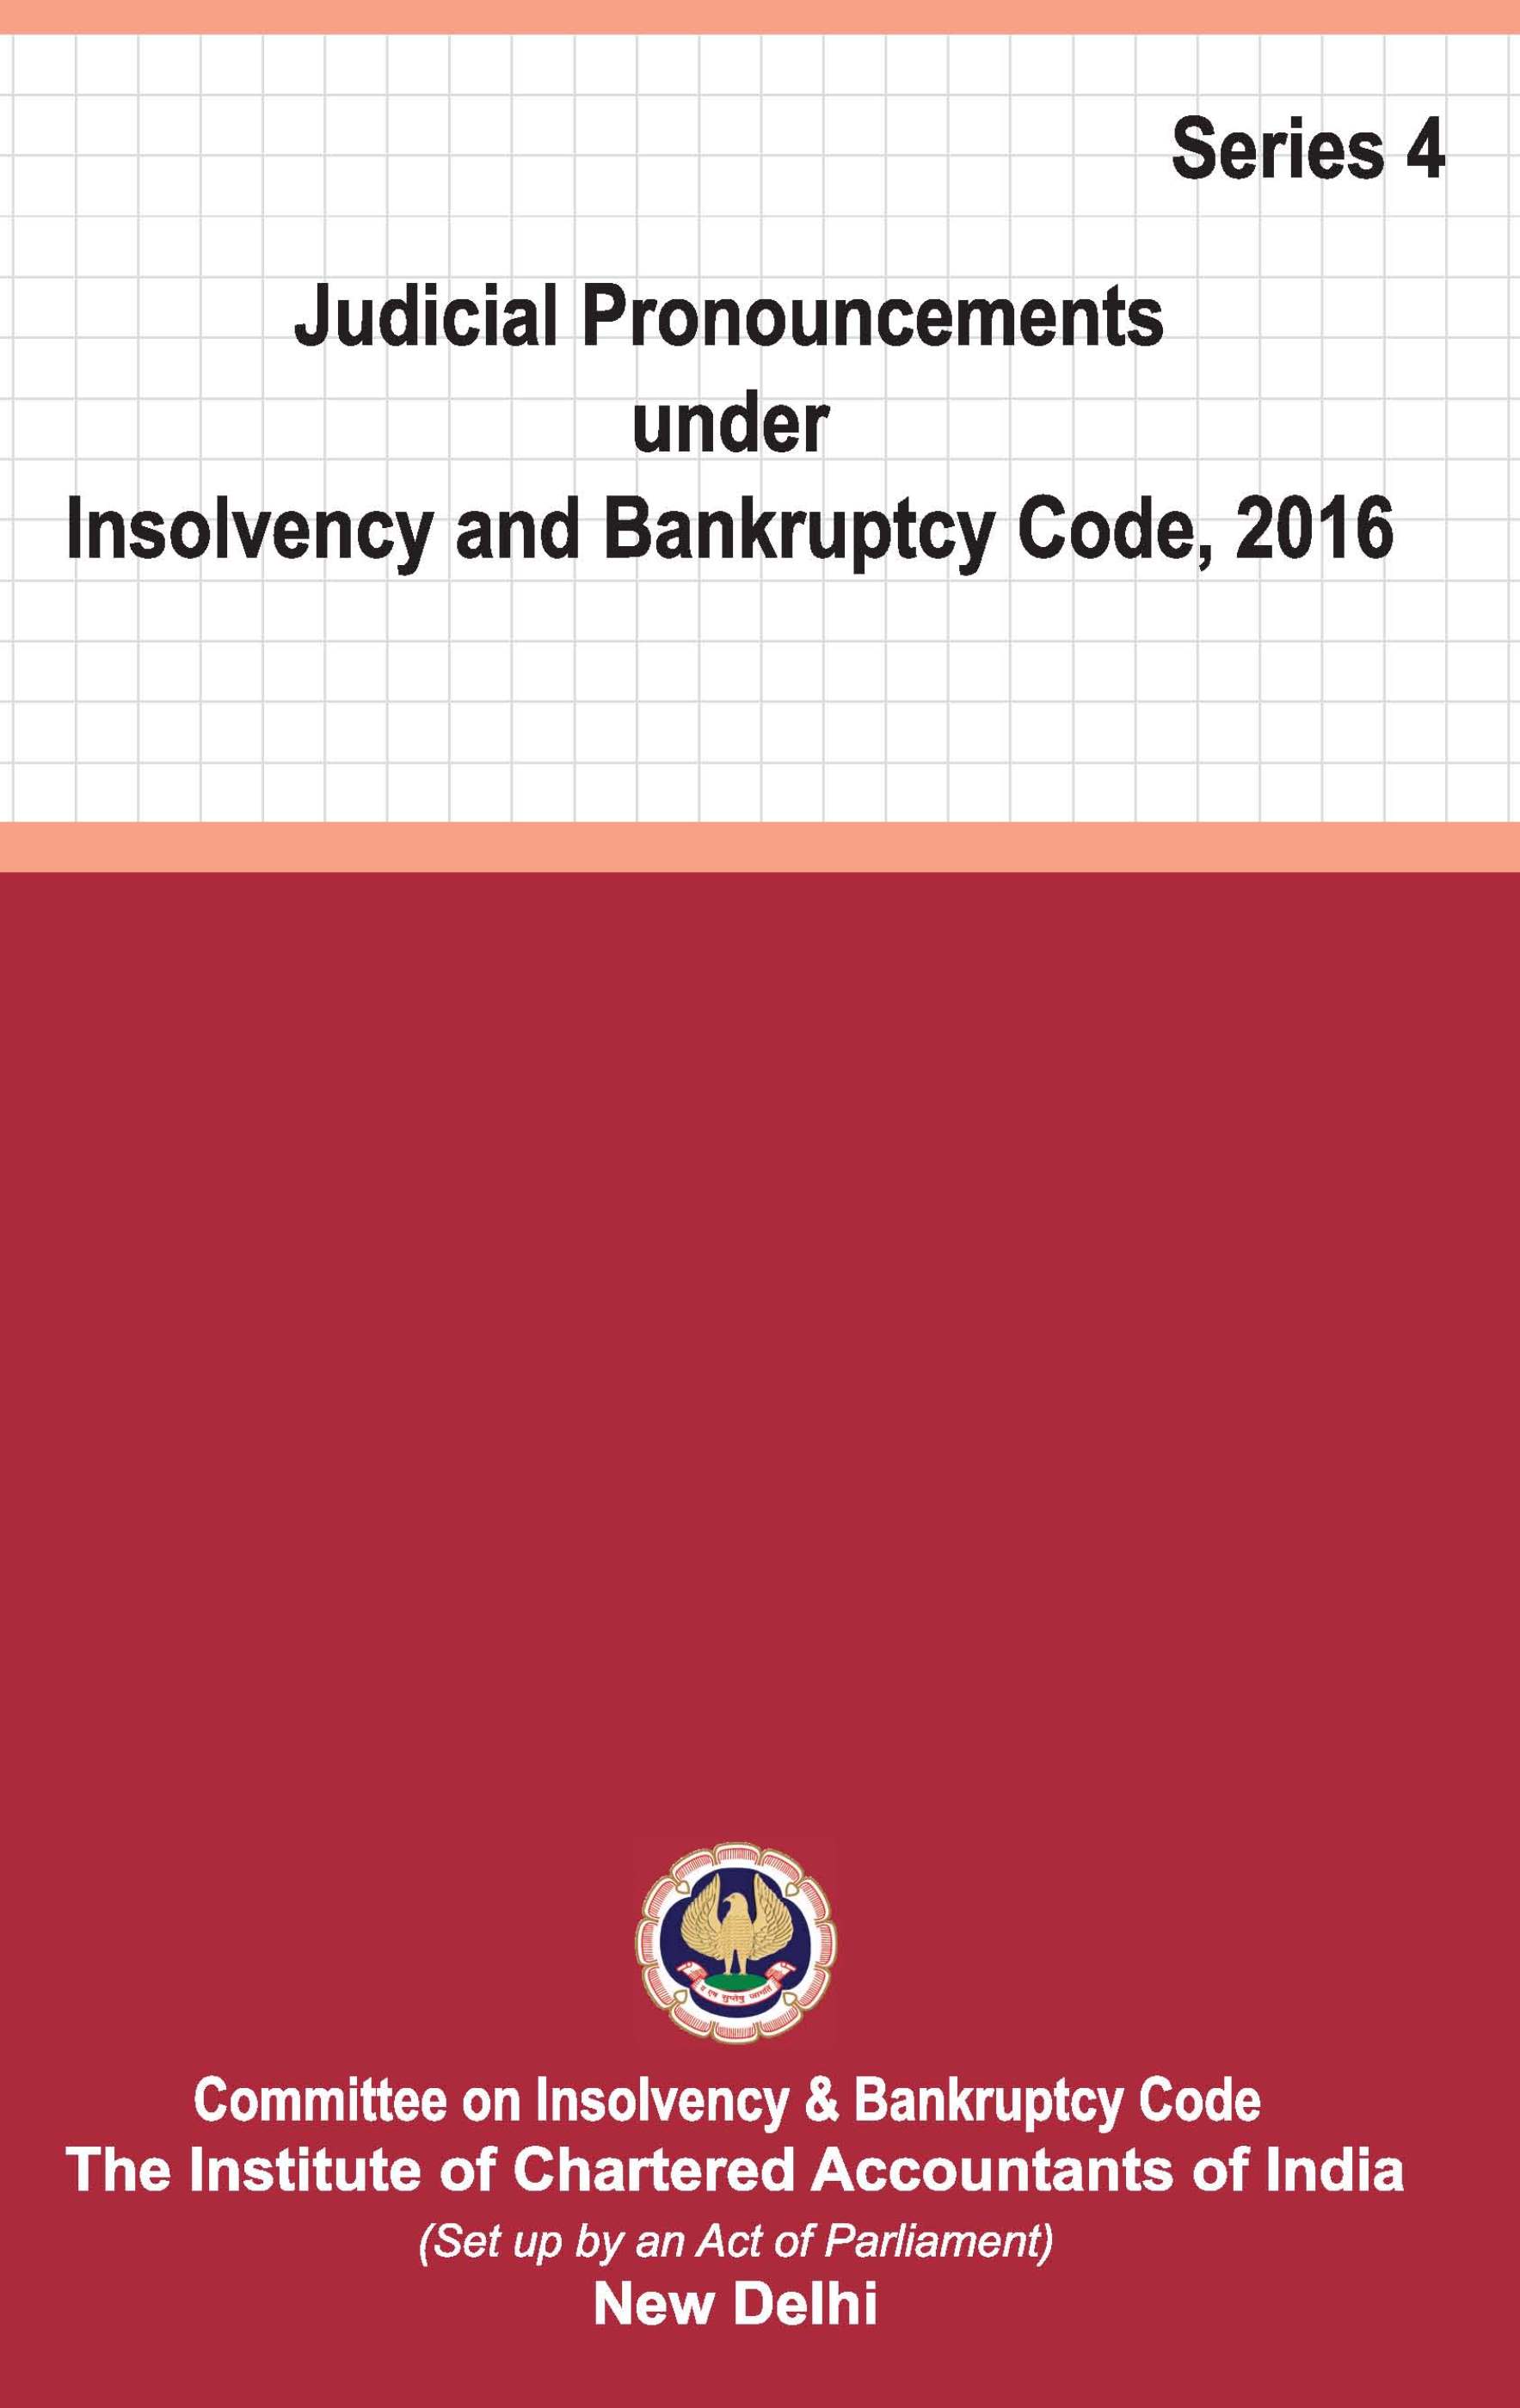 Judicial Pronouncements under Insolvency and Bankruptcy Code, 2016 Series 4 - February, 2023